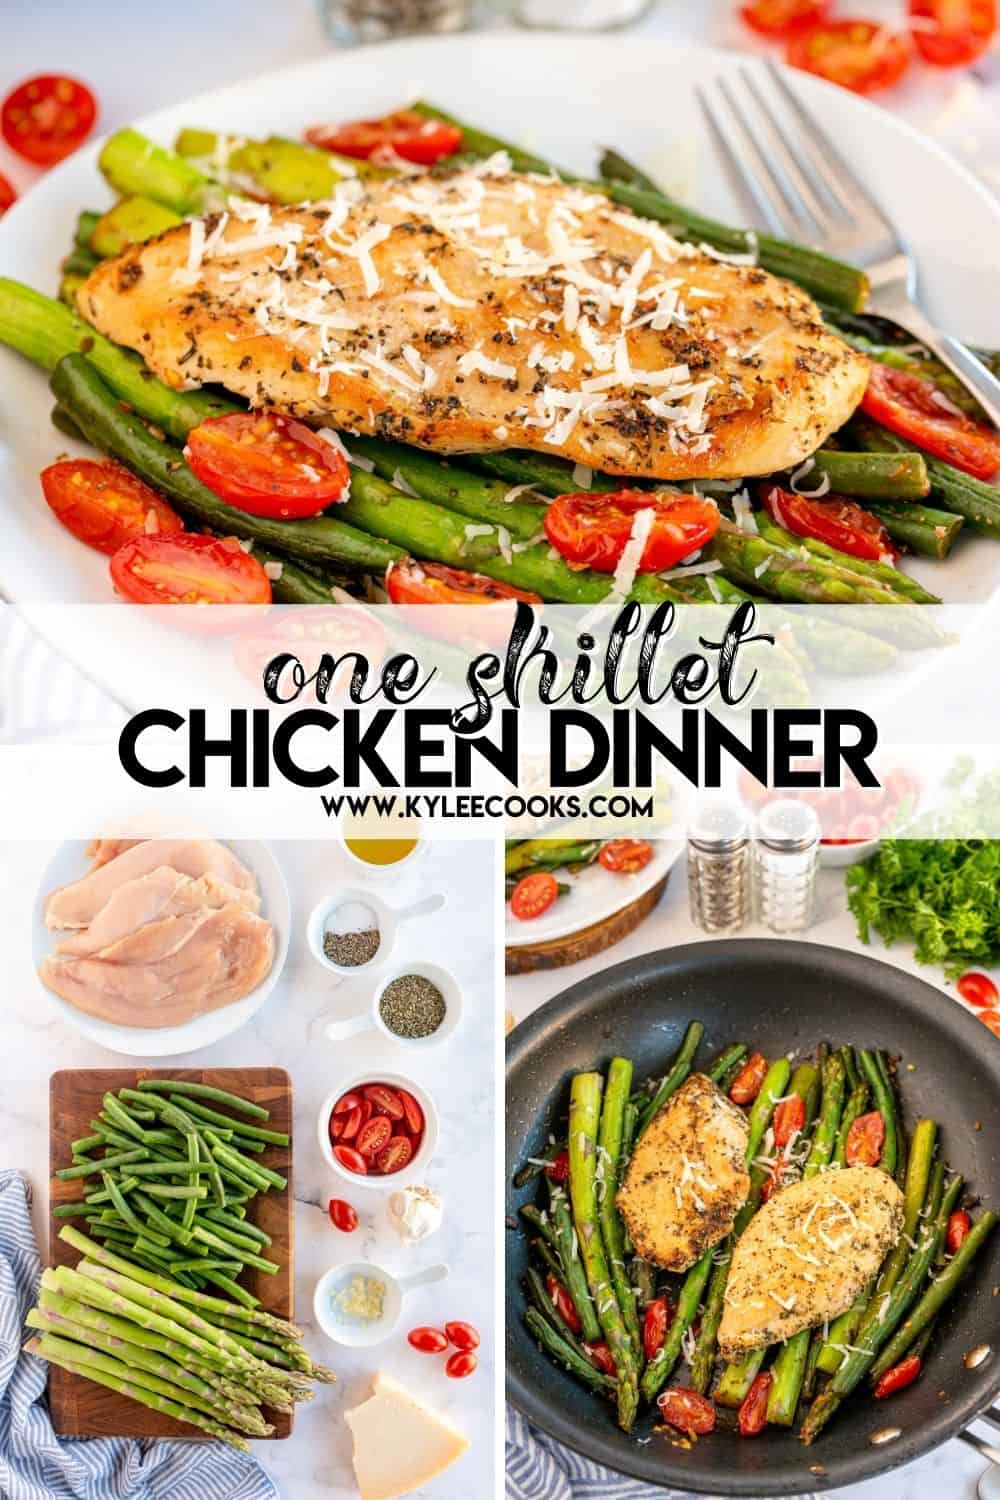 collage of chicken in a skillet and on a plate with "one skillet chicken dinner" overlaid in text.